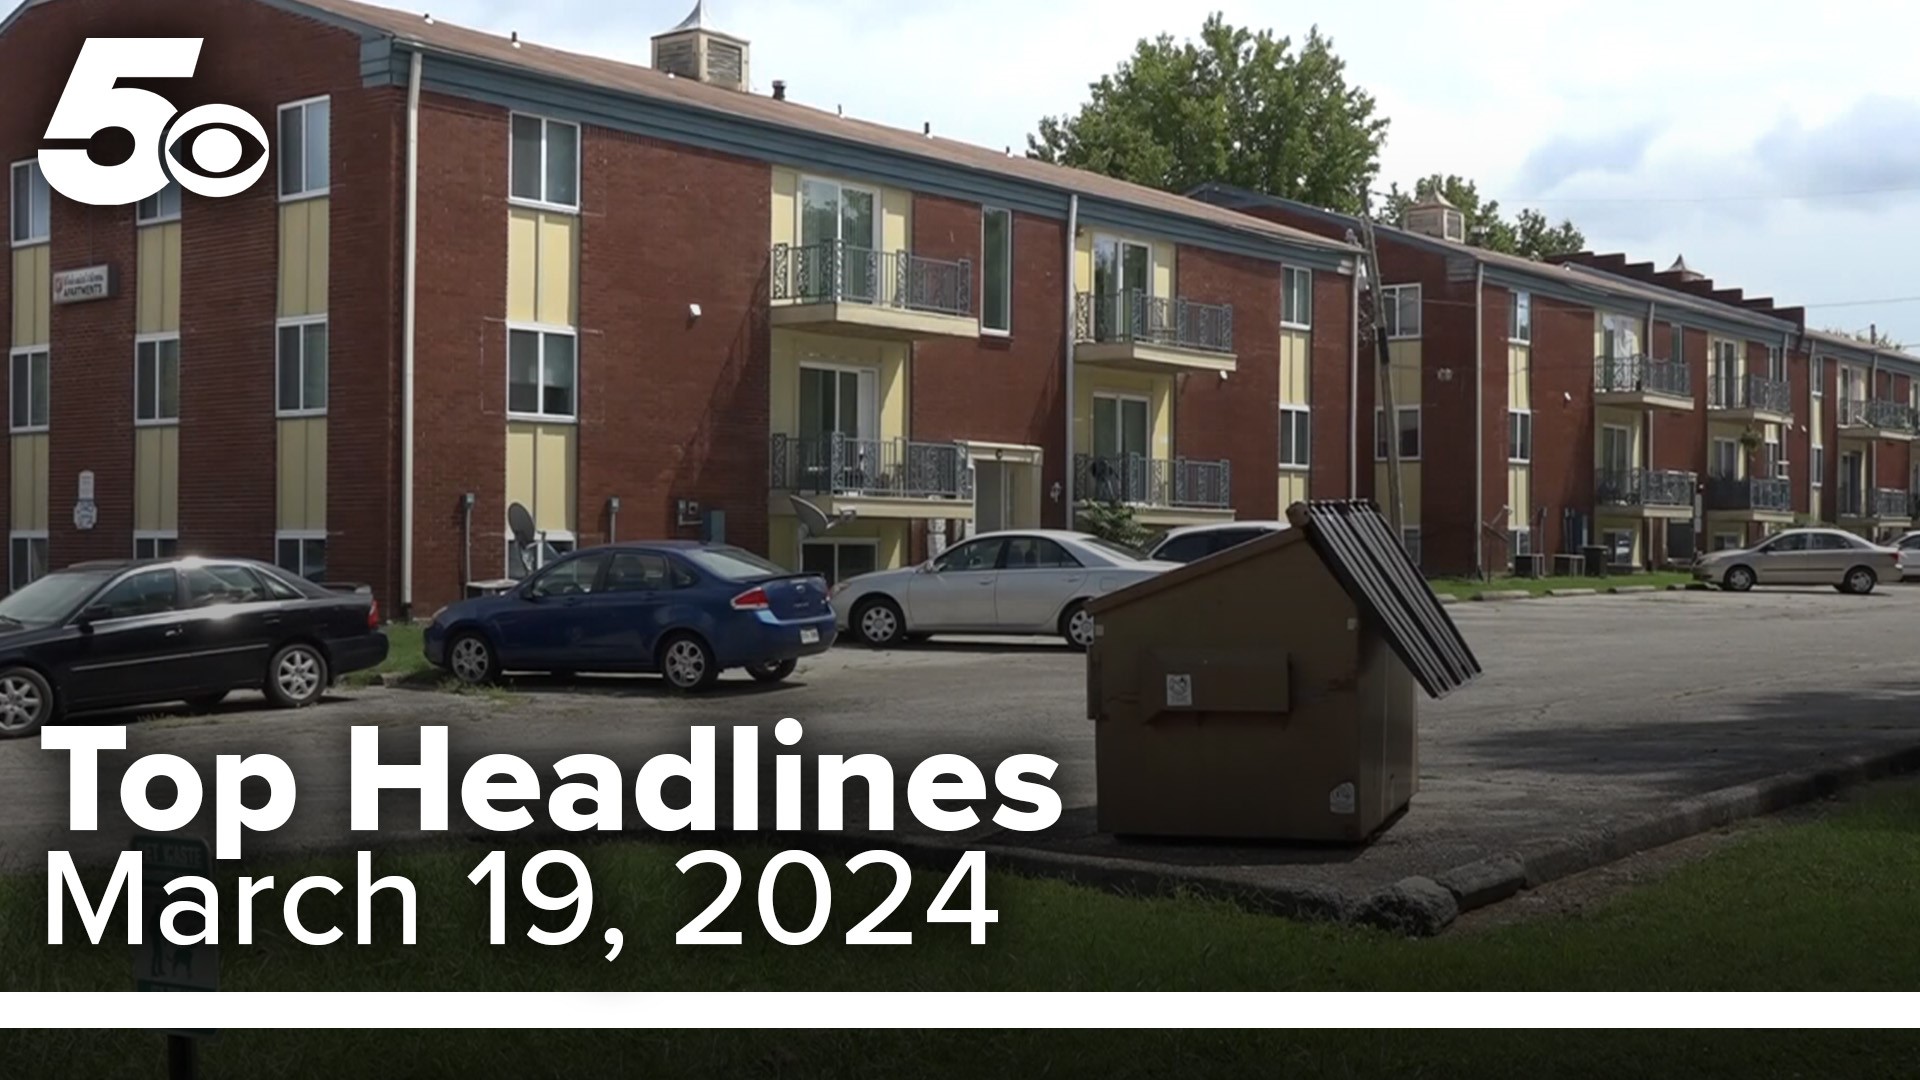 Fayetteville has declared a housing crisis amid the  Northwest Arkansas being named one of the fastest growing metros. Watch 5NEWS top headlines for more.